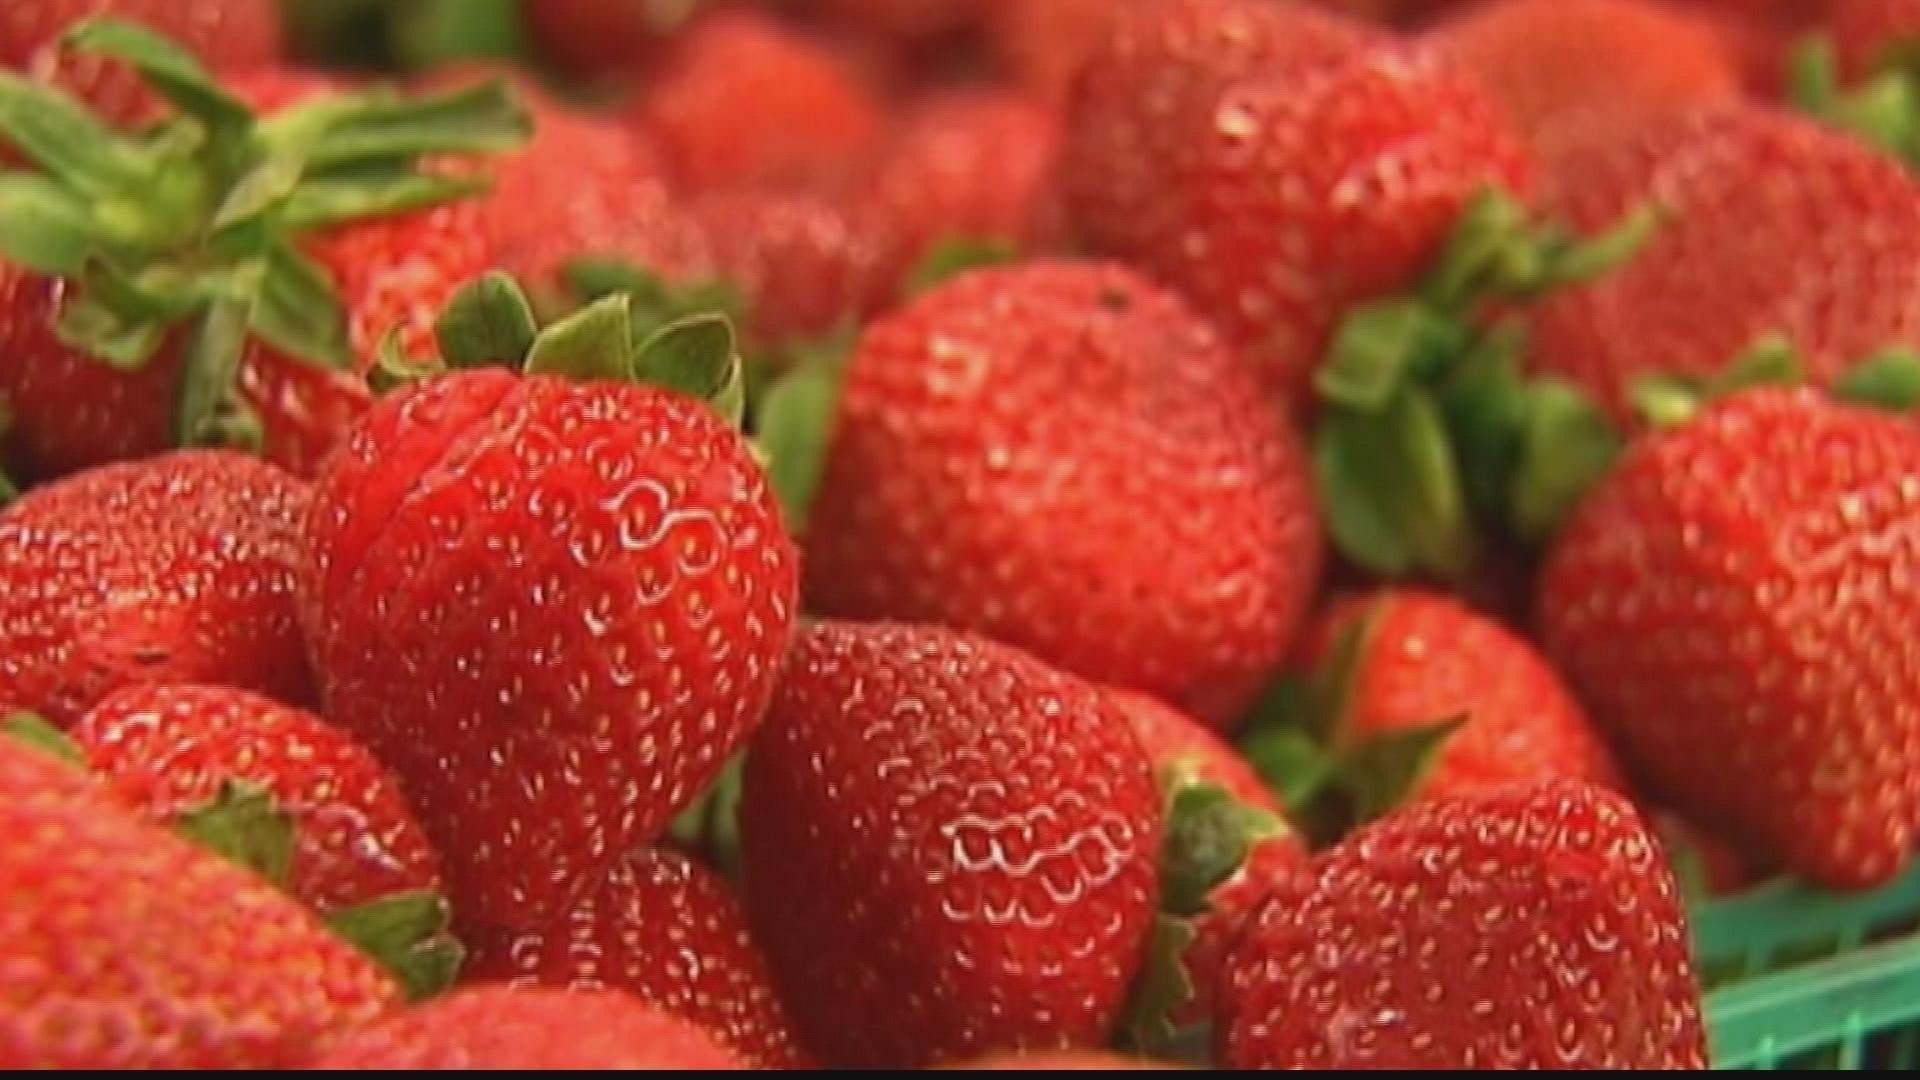 The FDA says the strawberries were sold at, but not limited to Aldi, HEB, Kroger, Safeway, Sprouts, Trader Joe's, Walmart, Weis Markets and WinCo Foods.